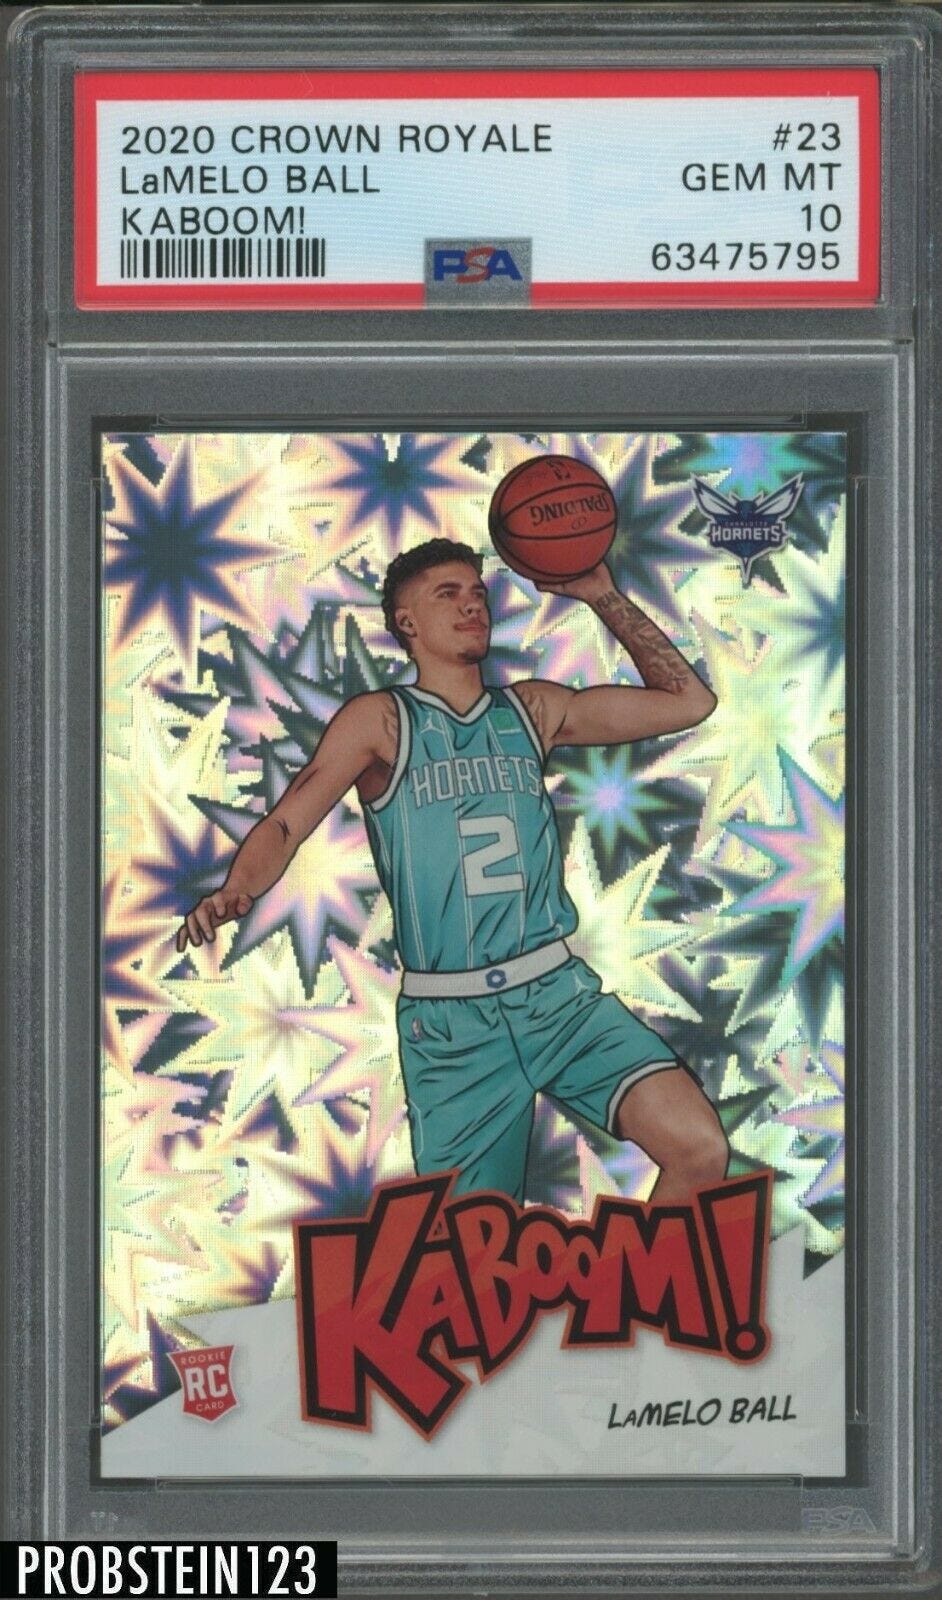 Image 1 - 2020-21 Panini Crown Royale KABOOM! #23 LaMelo Ball RC Rookie PSA 10 HOT CARD